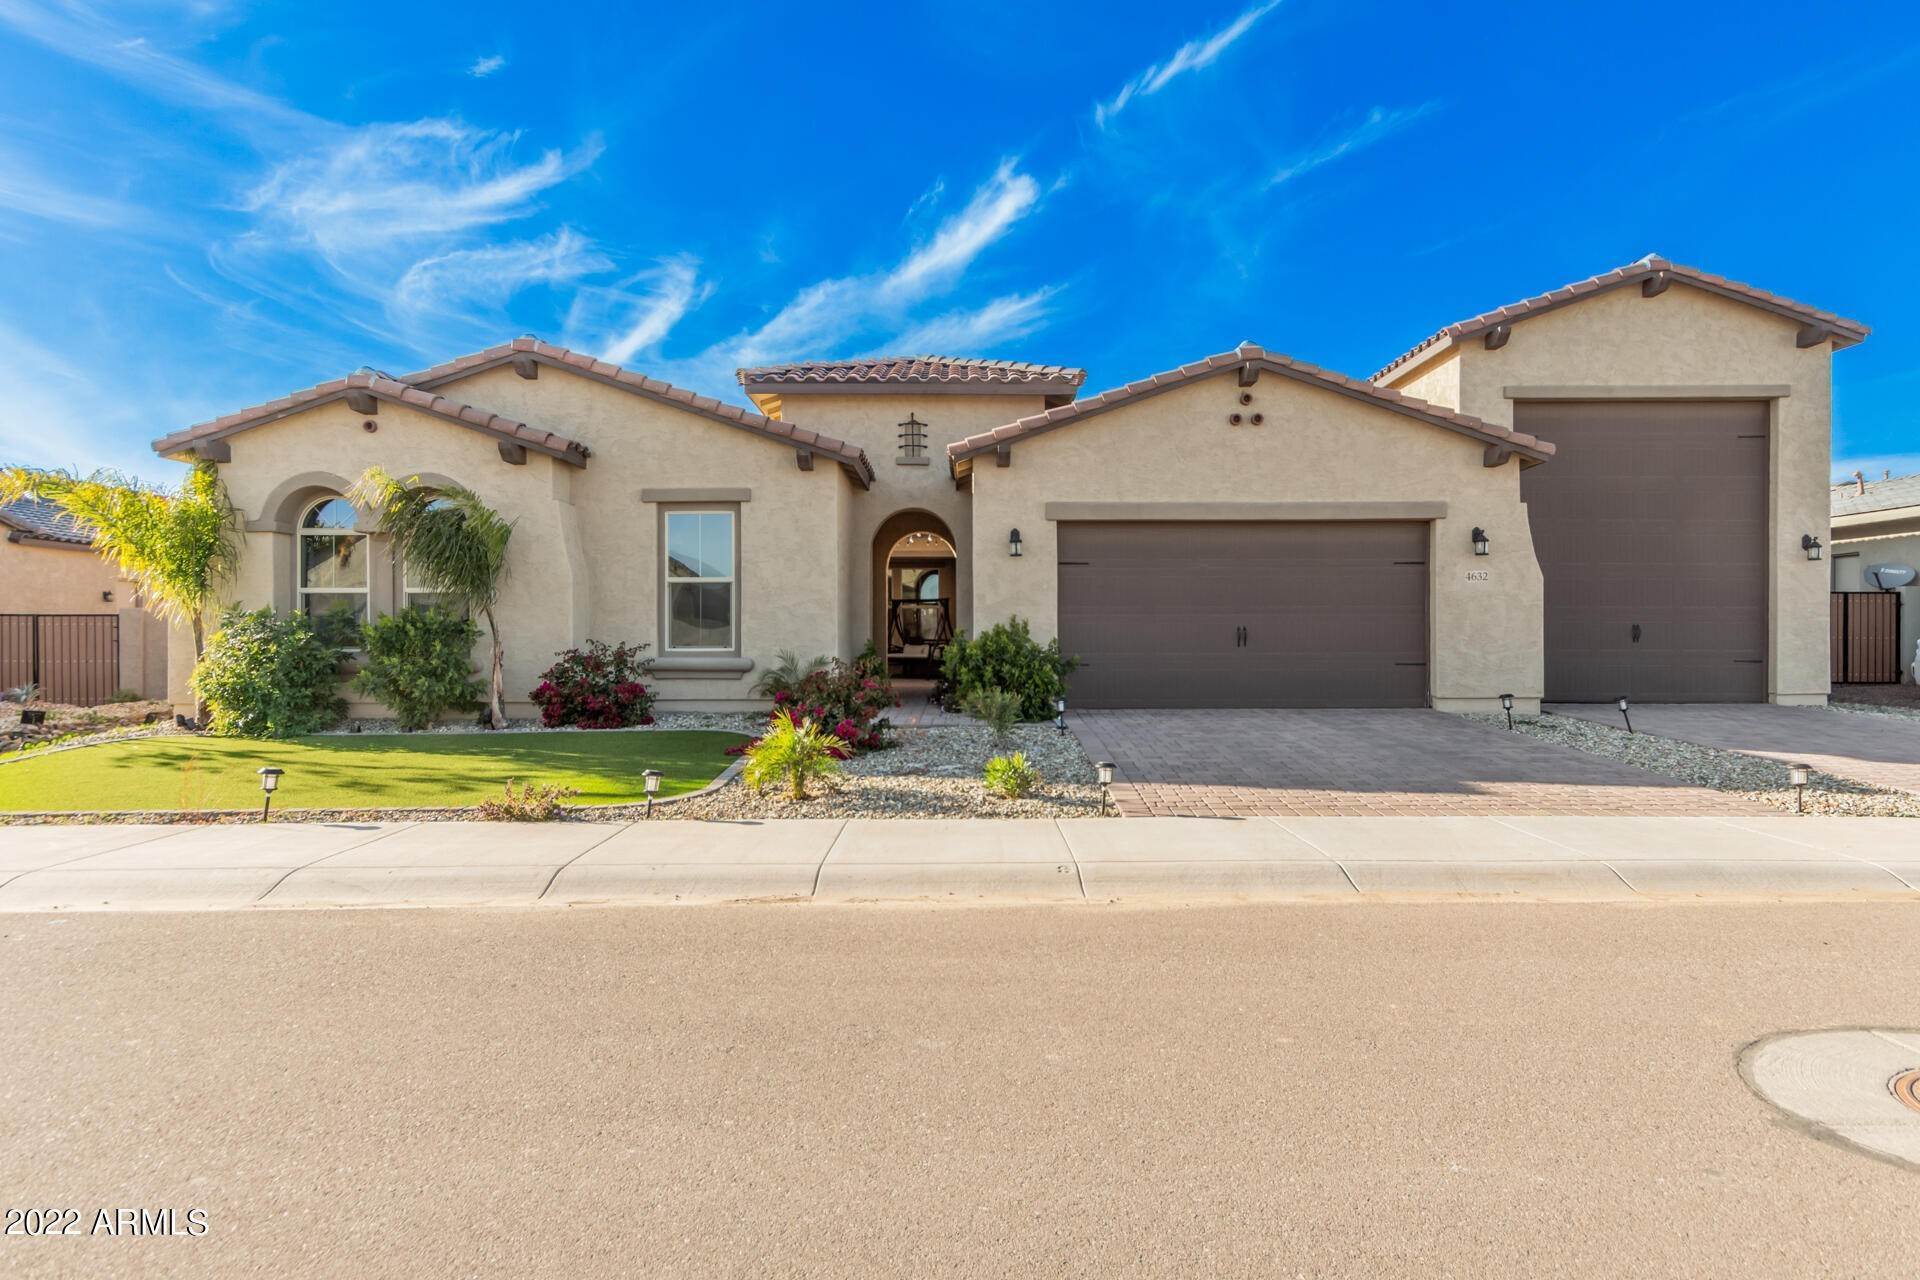 19. Single Family for Sale at Goodyear, AZ 85395